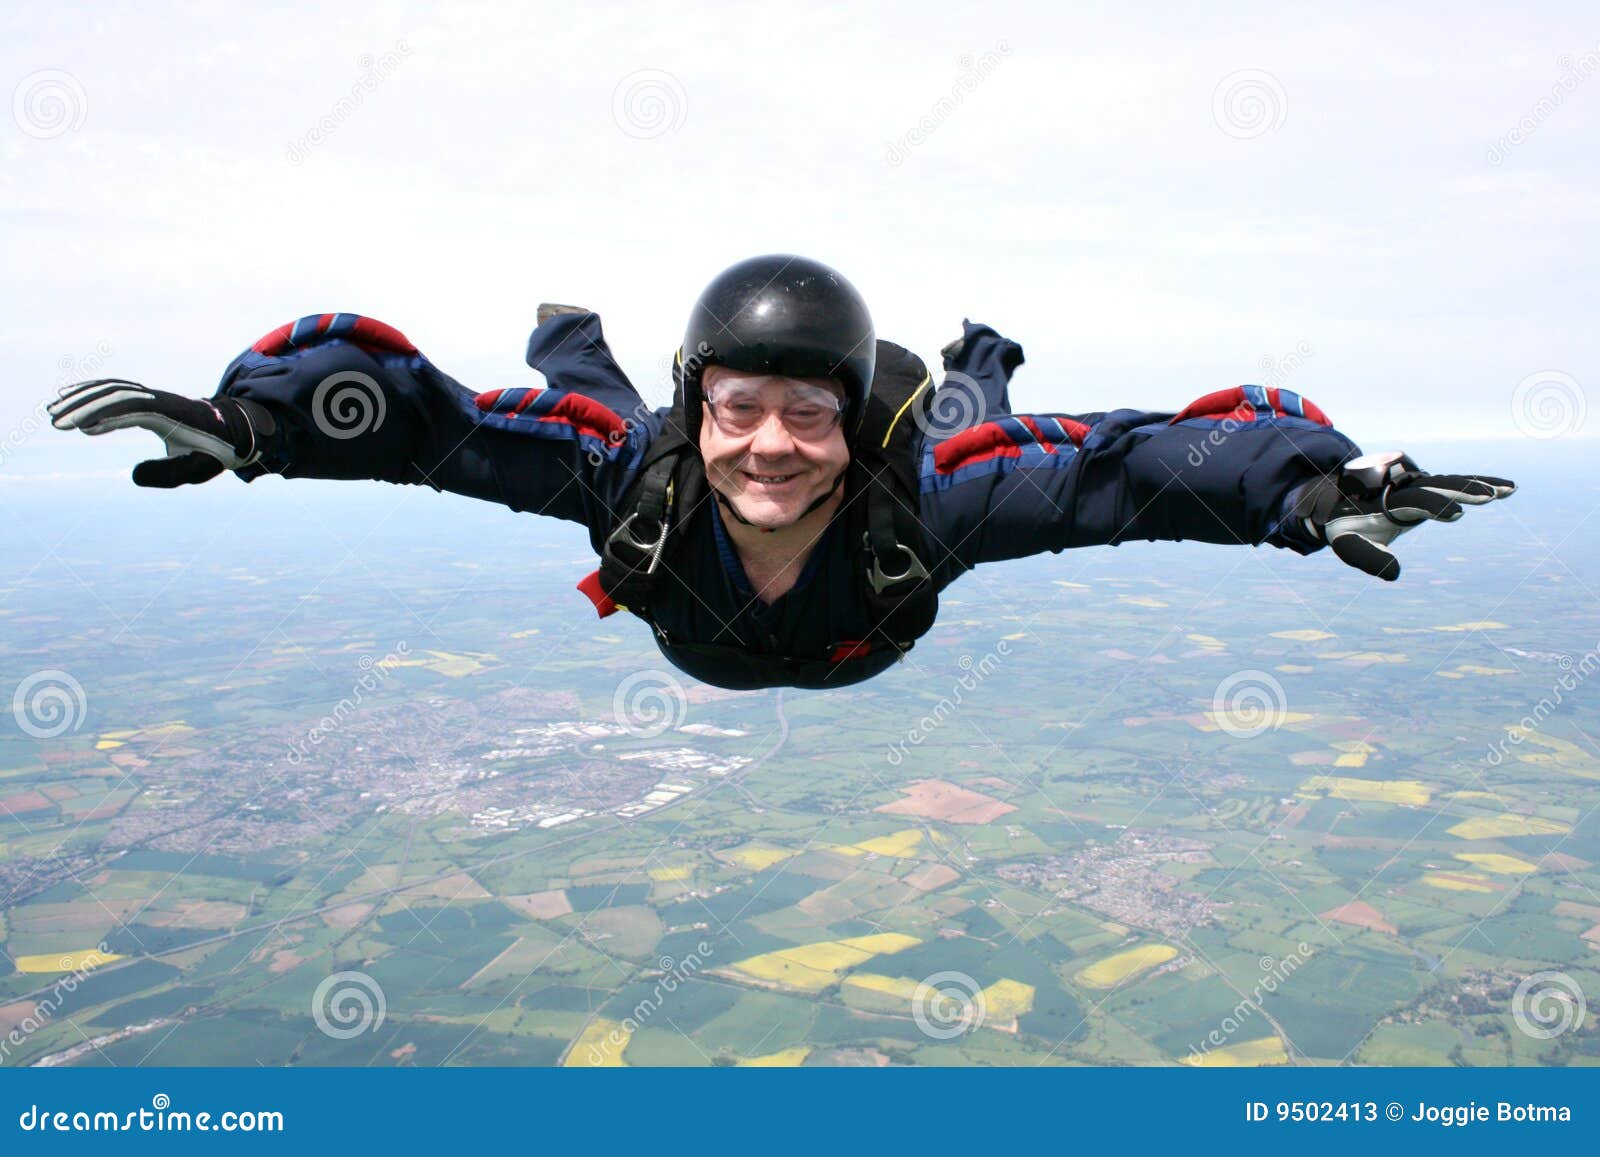 skydiver in freefall